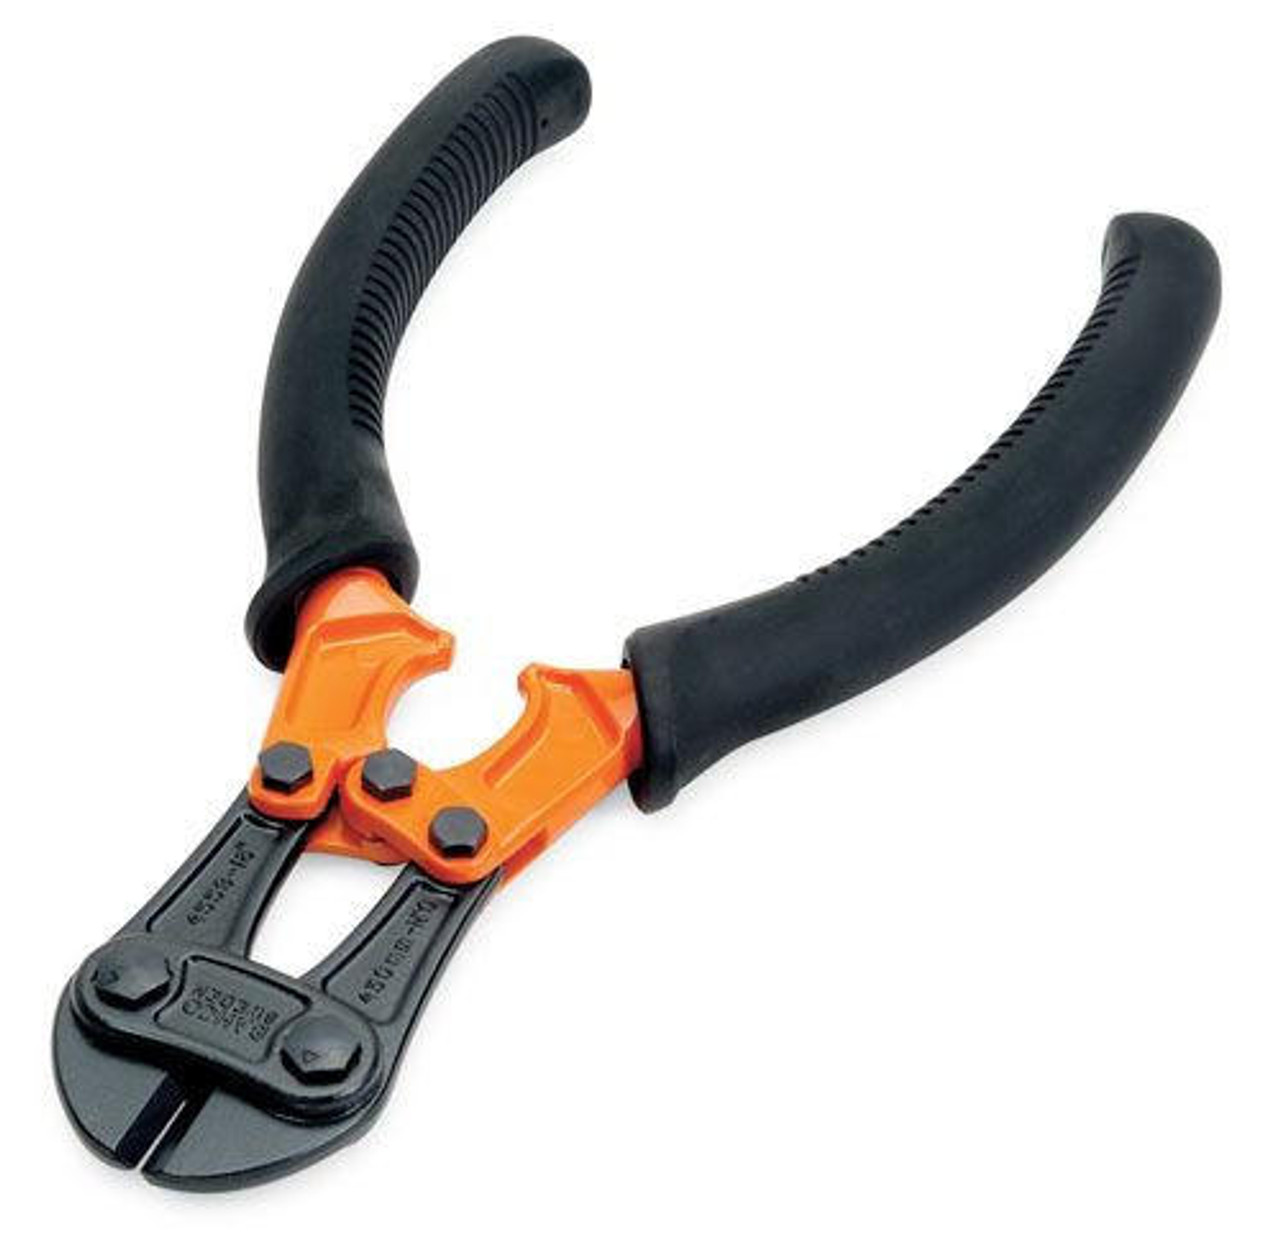 Bahco 36" Bahco Comfort Grip Bolt Cutter - 4559-36 